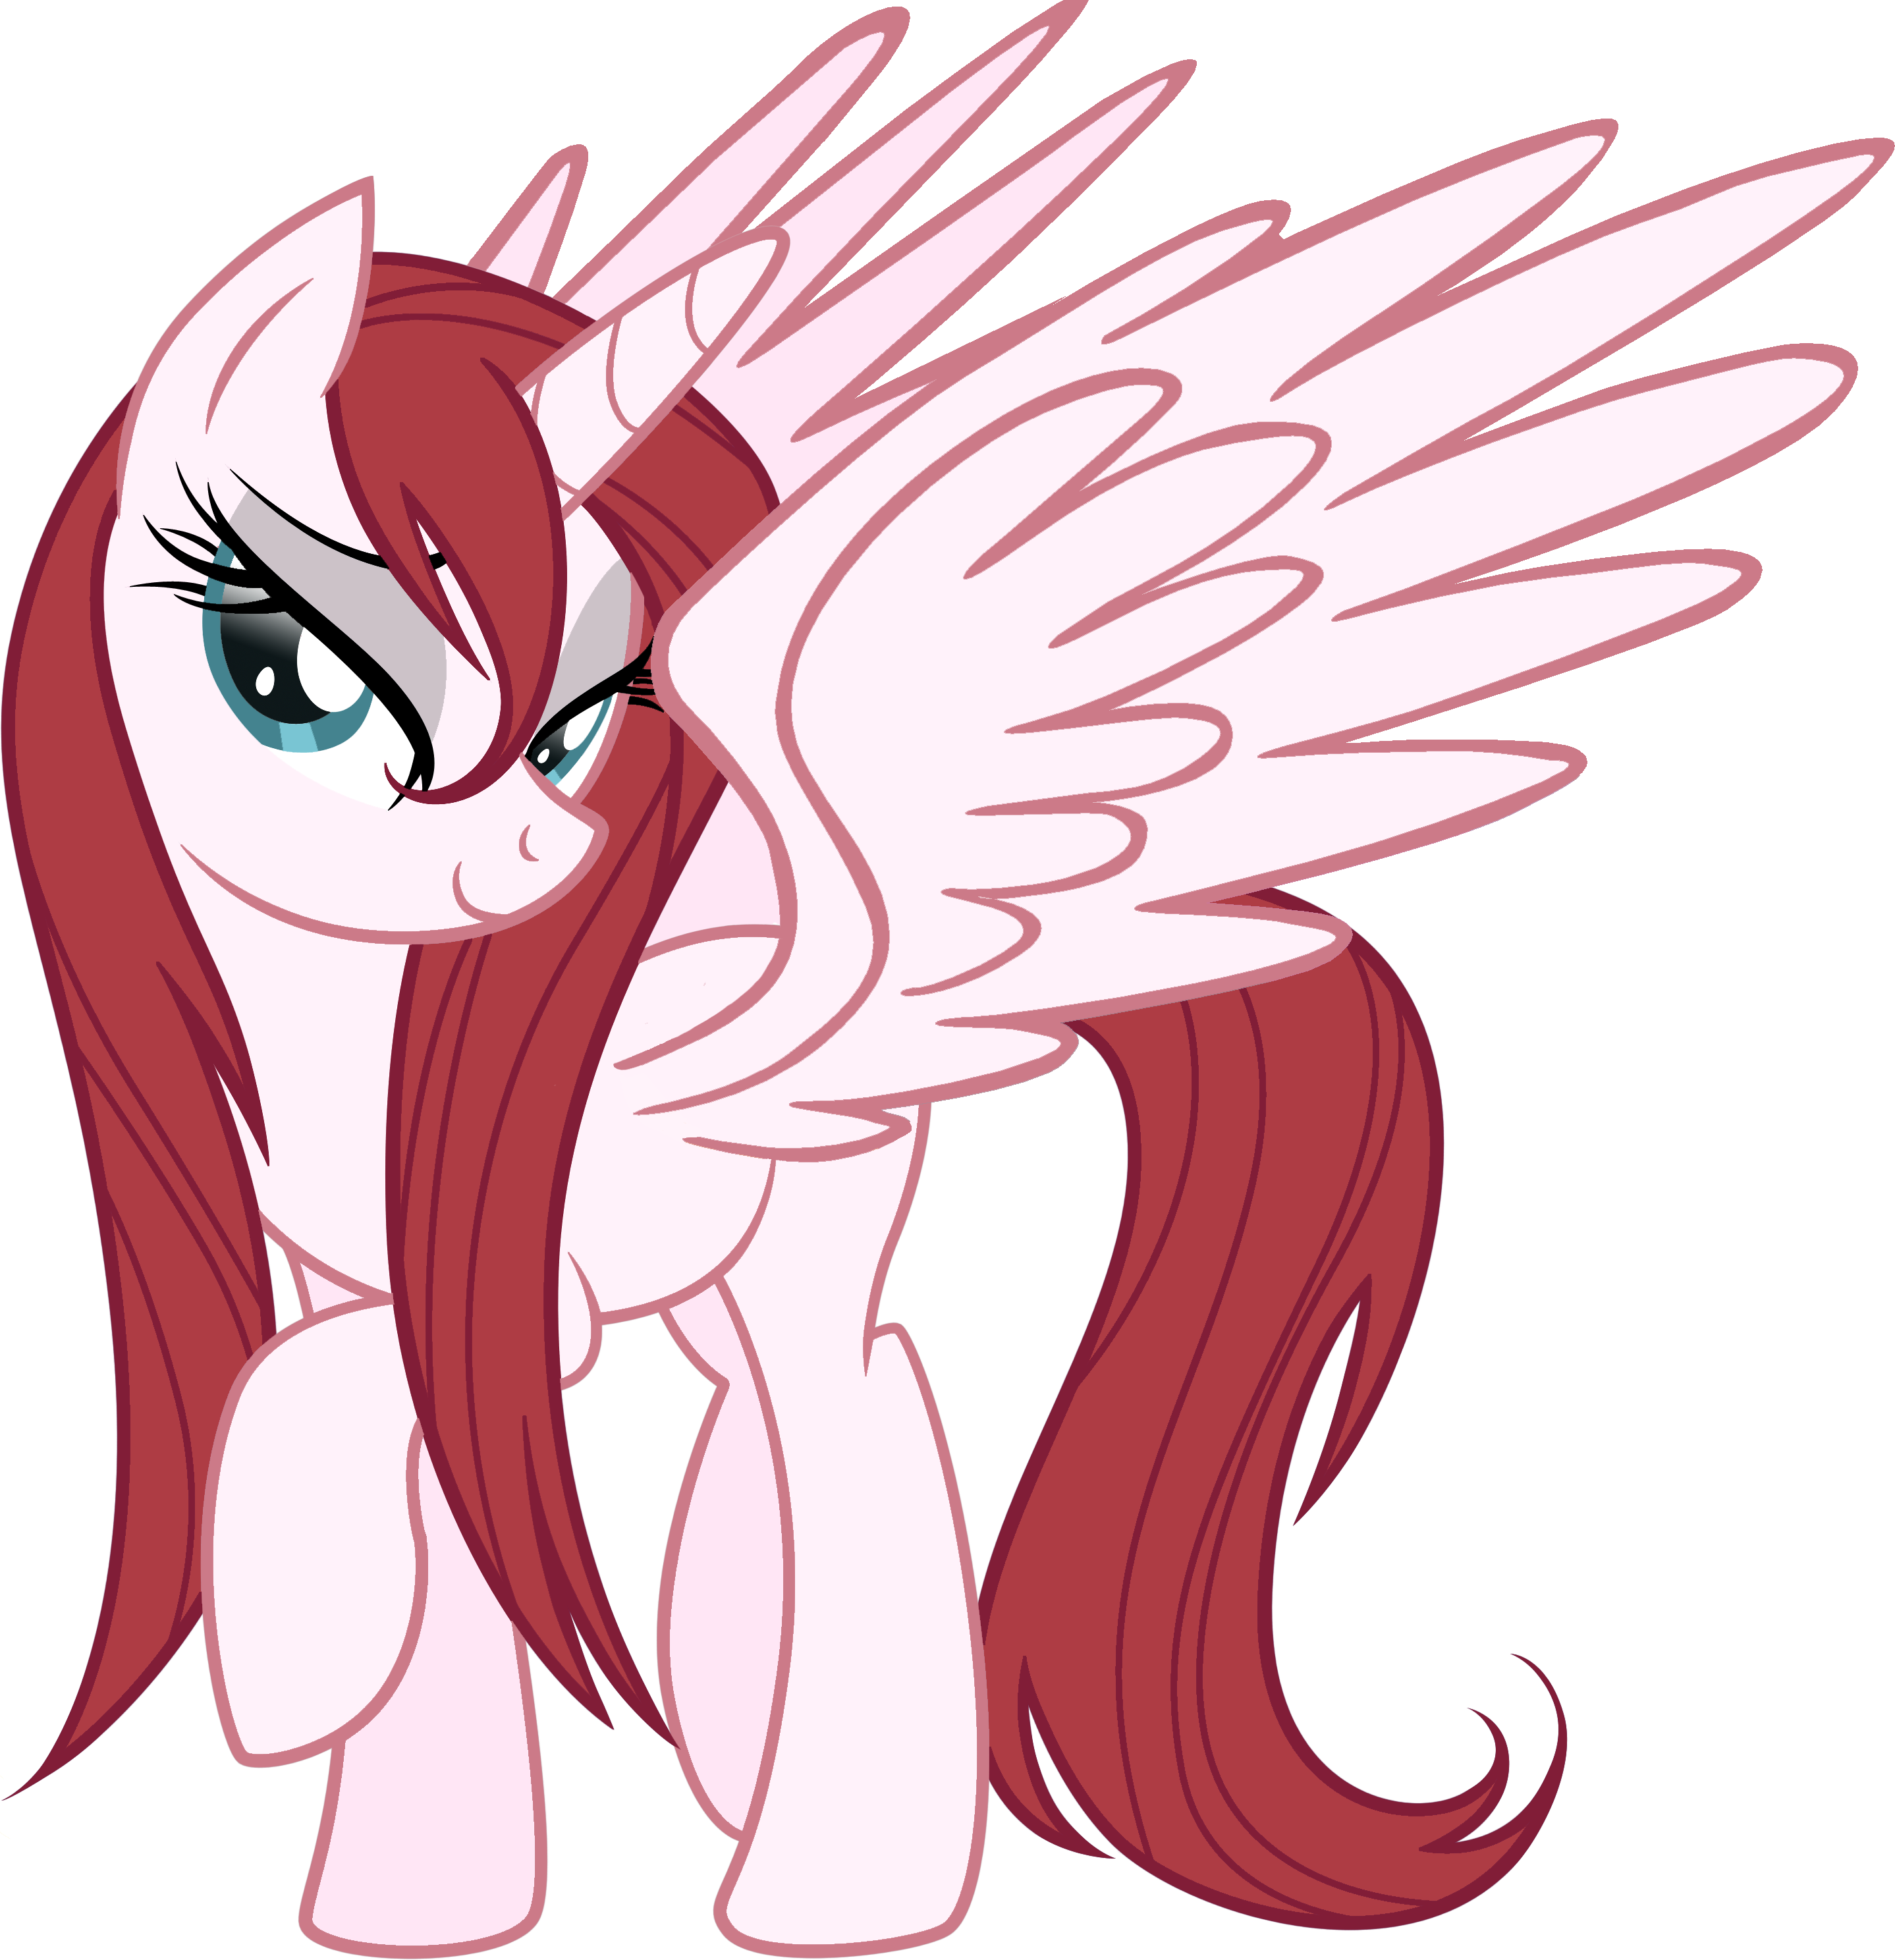 Image - My Little Pony Red Hair (2877x2976)